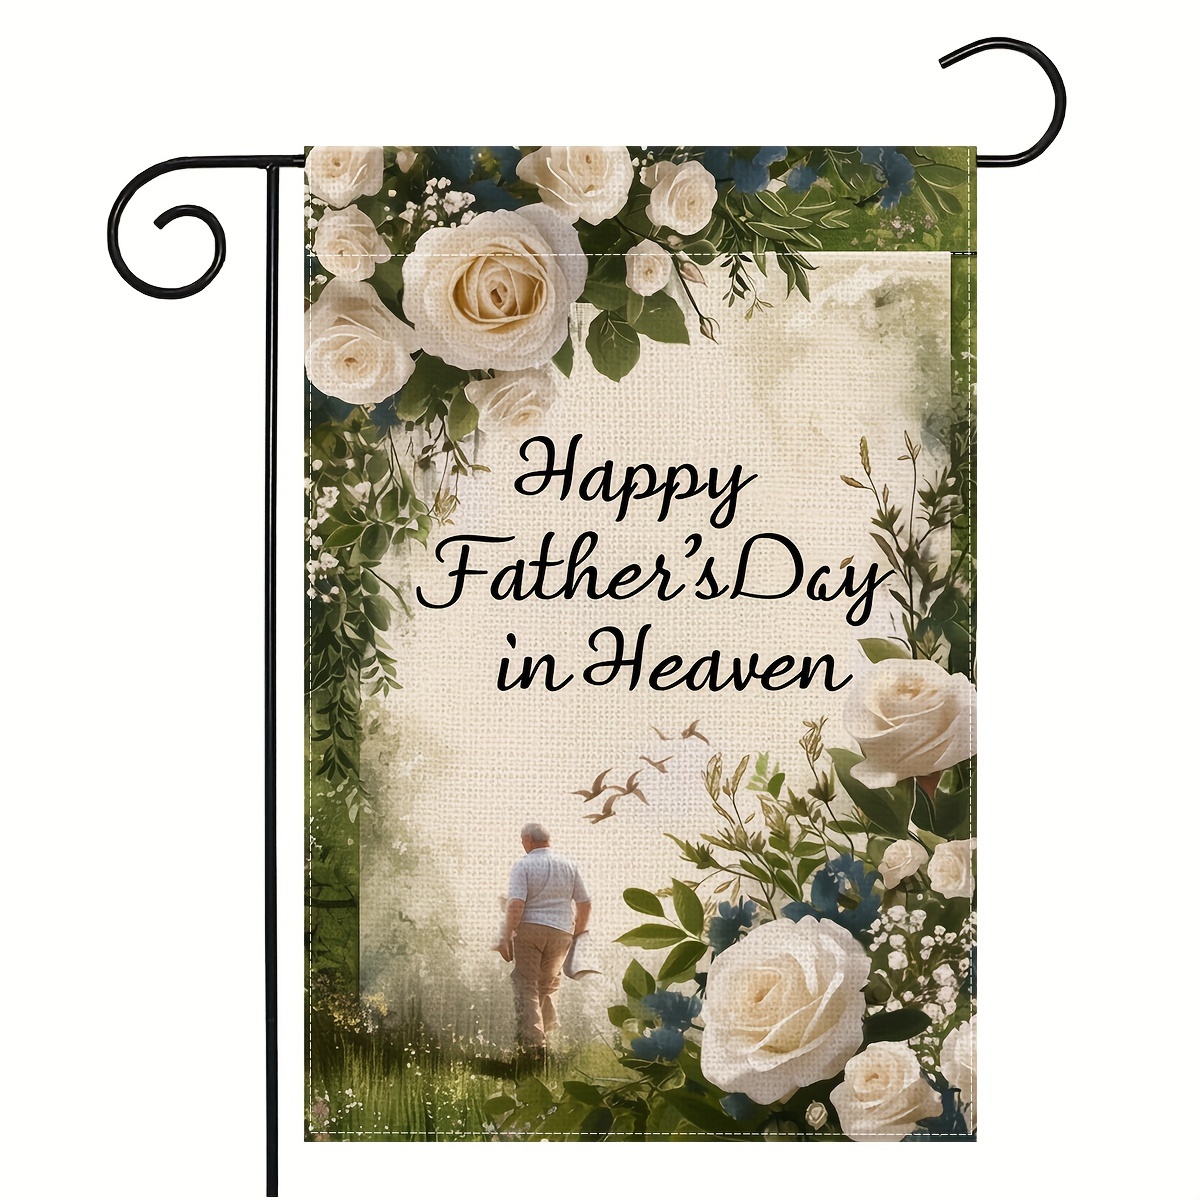 

Happy Father's Day In Heaven Garden Flag - Linen, Double-sided, Weather-resistant, 12x18 For Outdoor Memorial Display